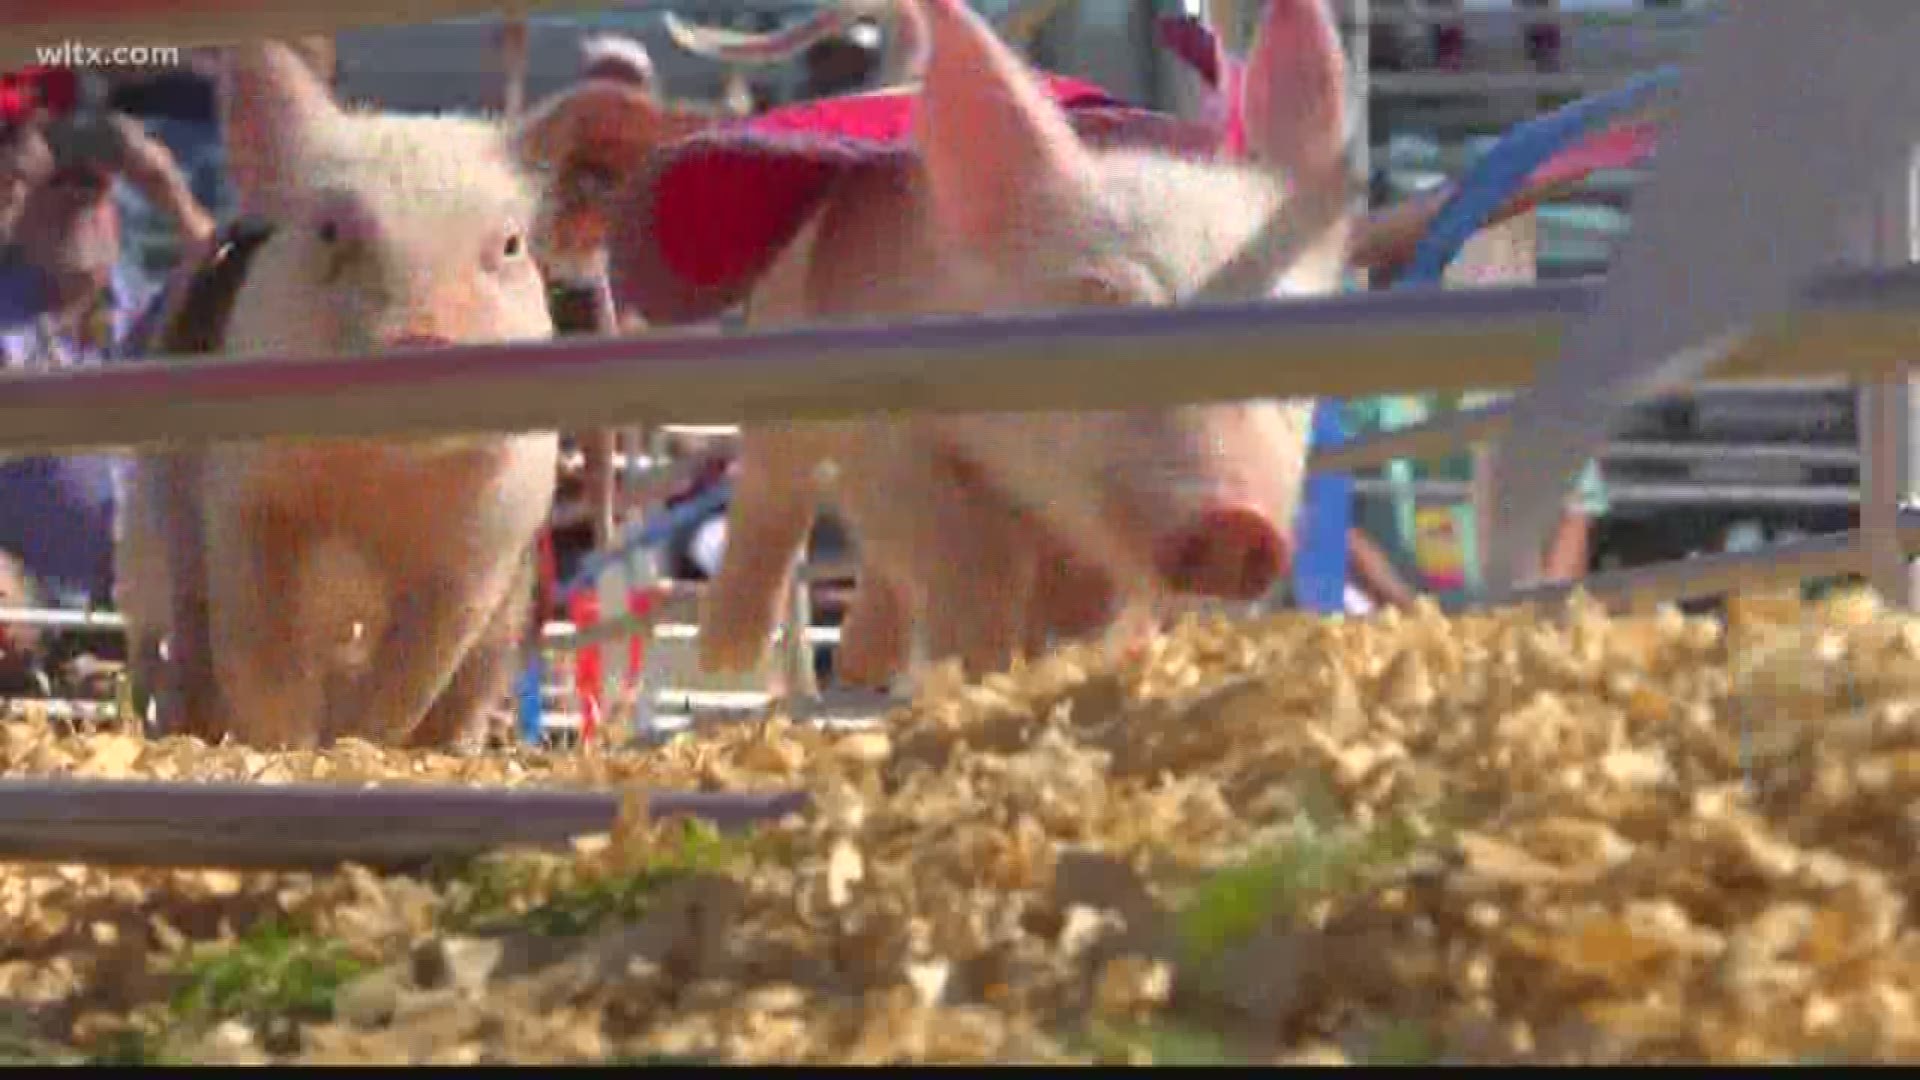 The racing pigs always are a popular attraction at the South Carolina State Fair.